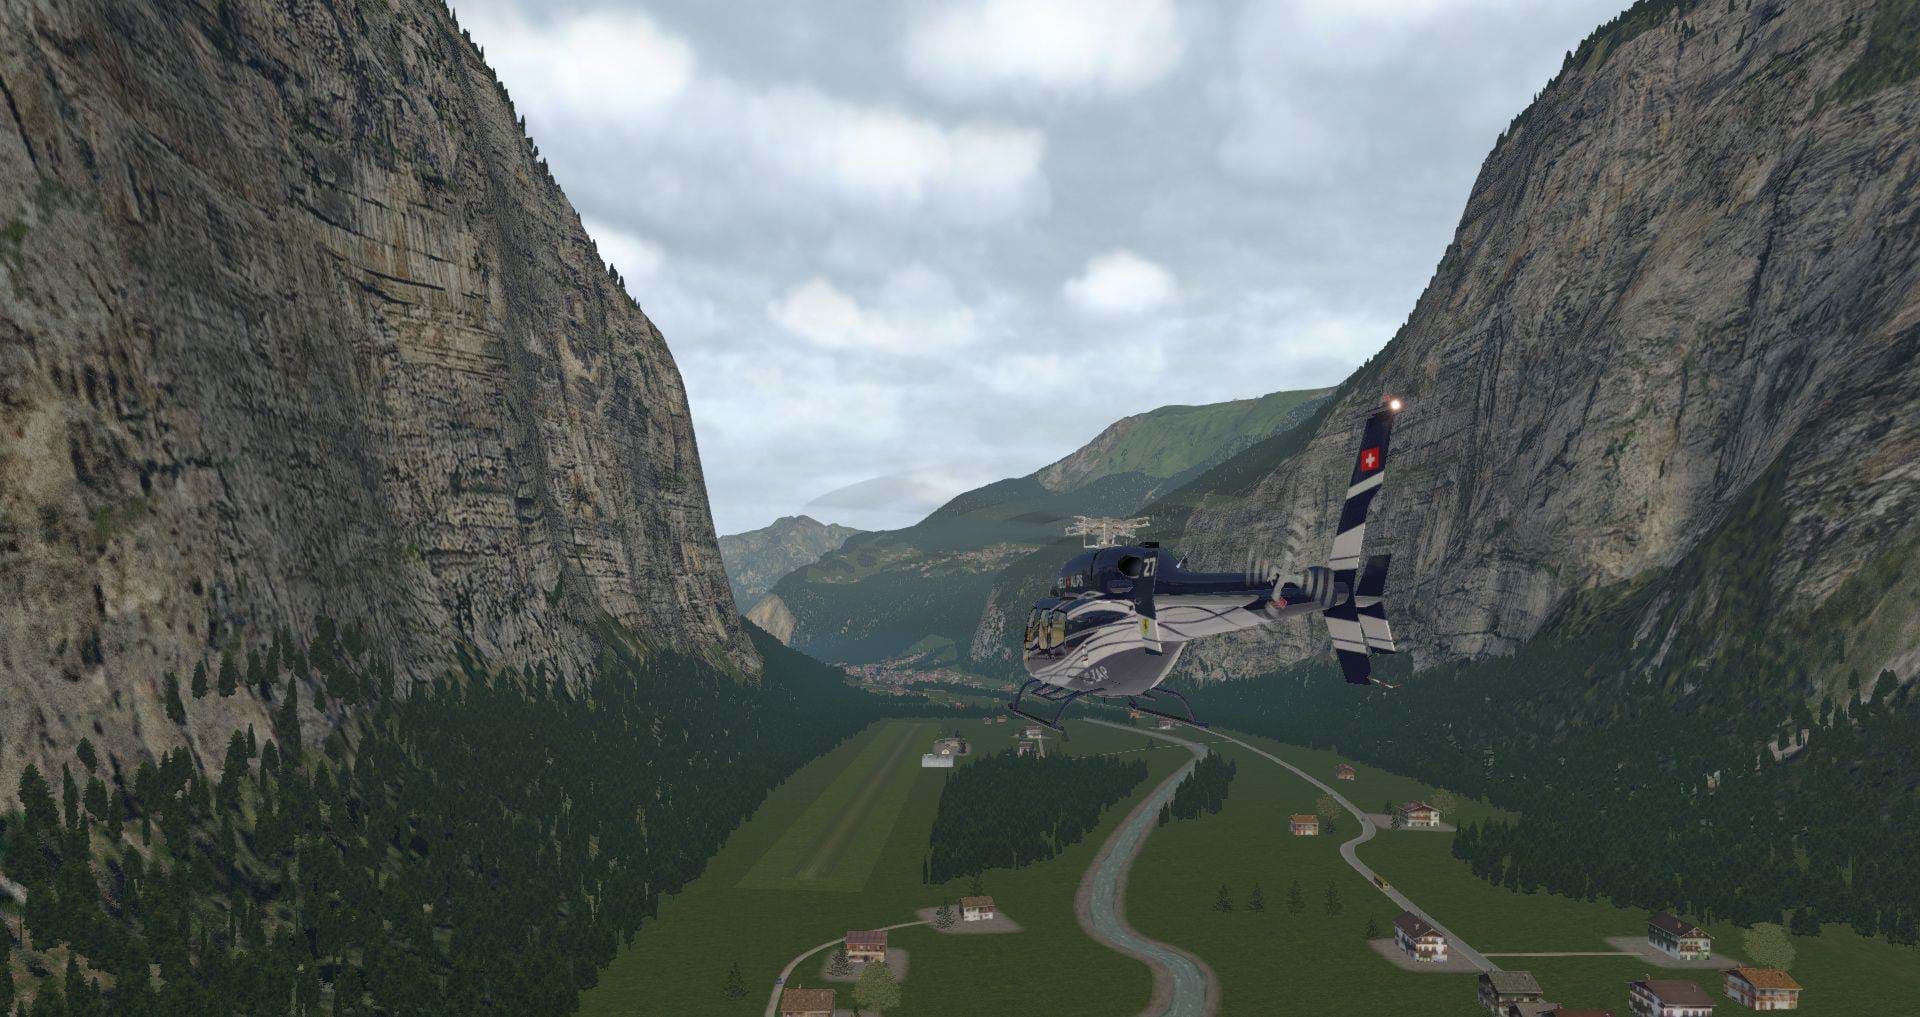 Frank Dainese and Fabio Bellini's Eiger Park 3D for X-Plane